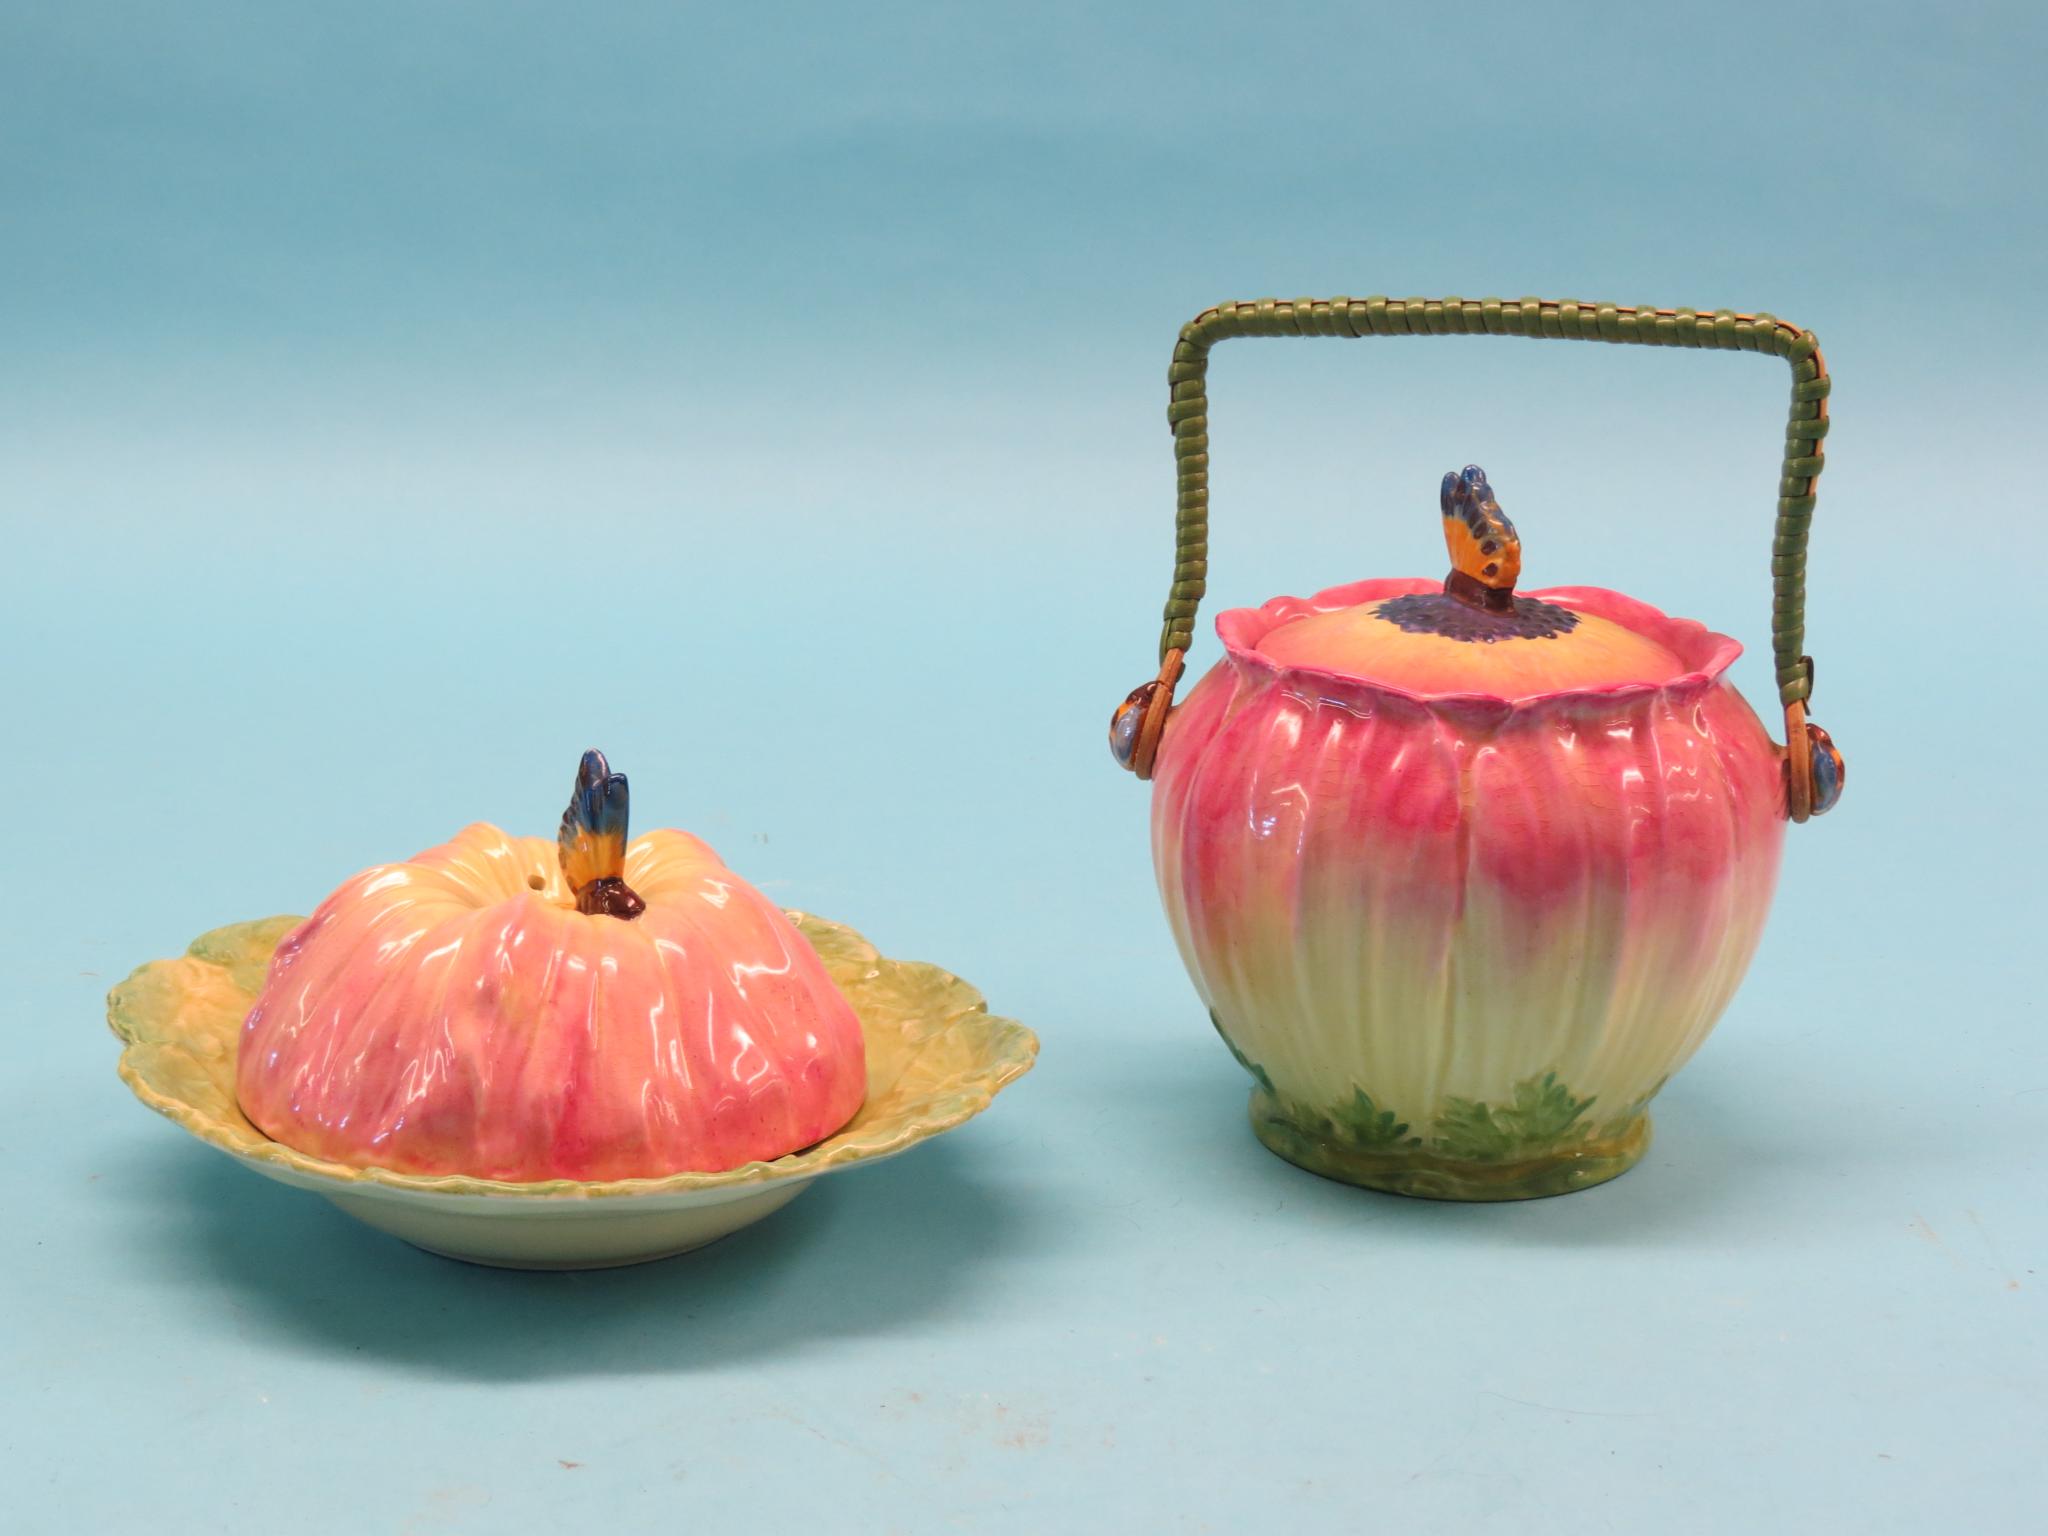 A Beswick Gardena Ware biscuit barrel, matching muffin dish, both with covers, opaque glass oil